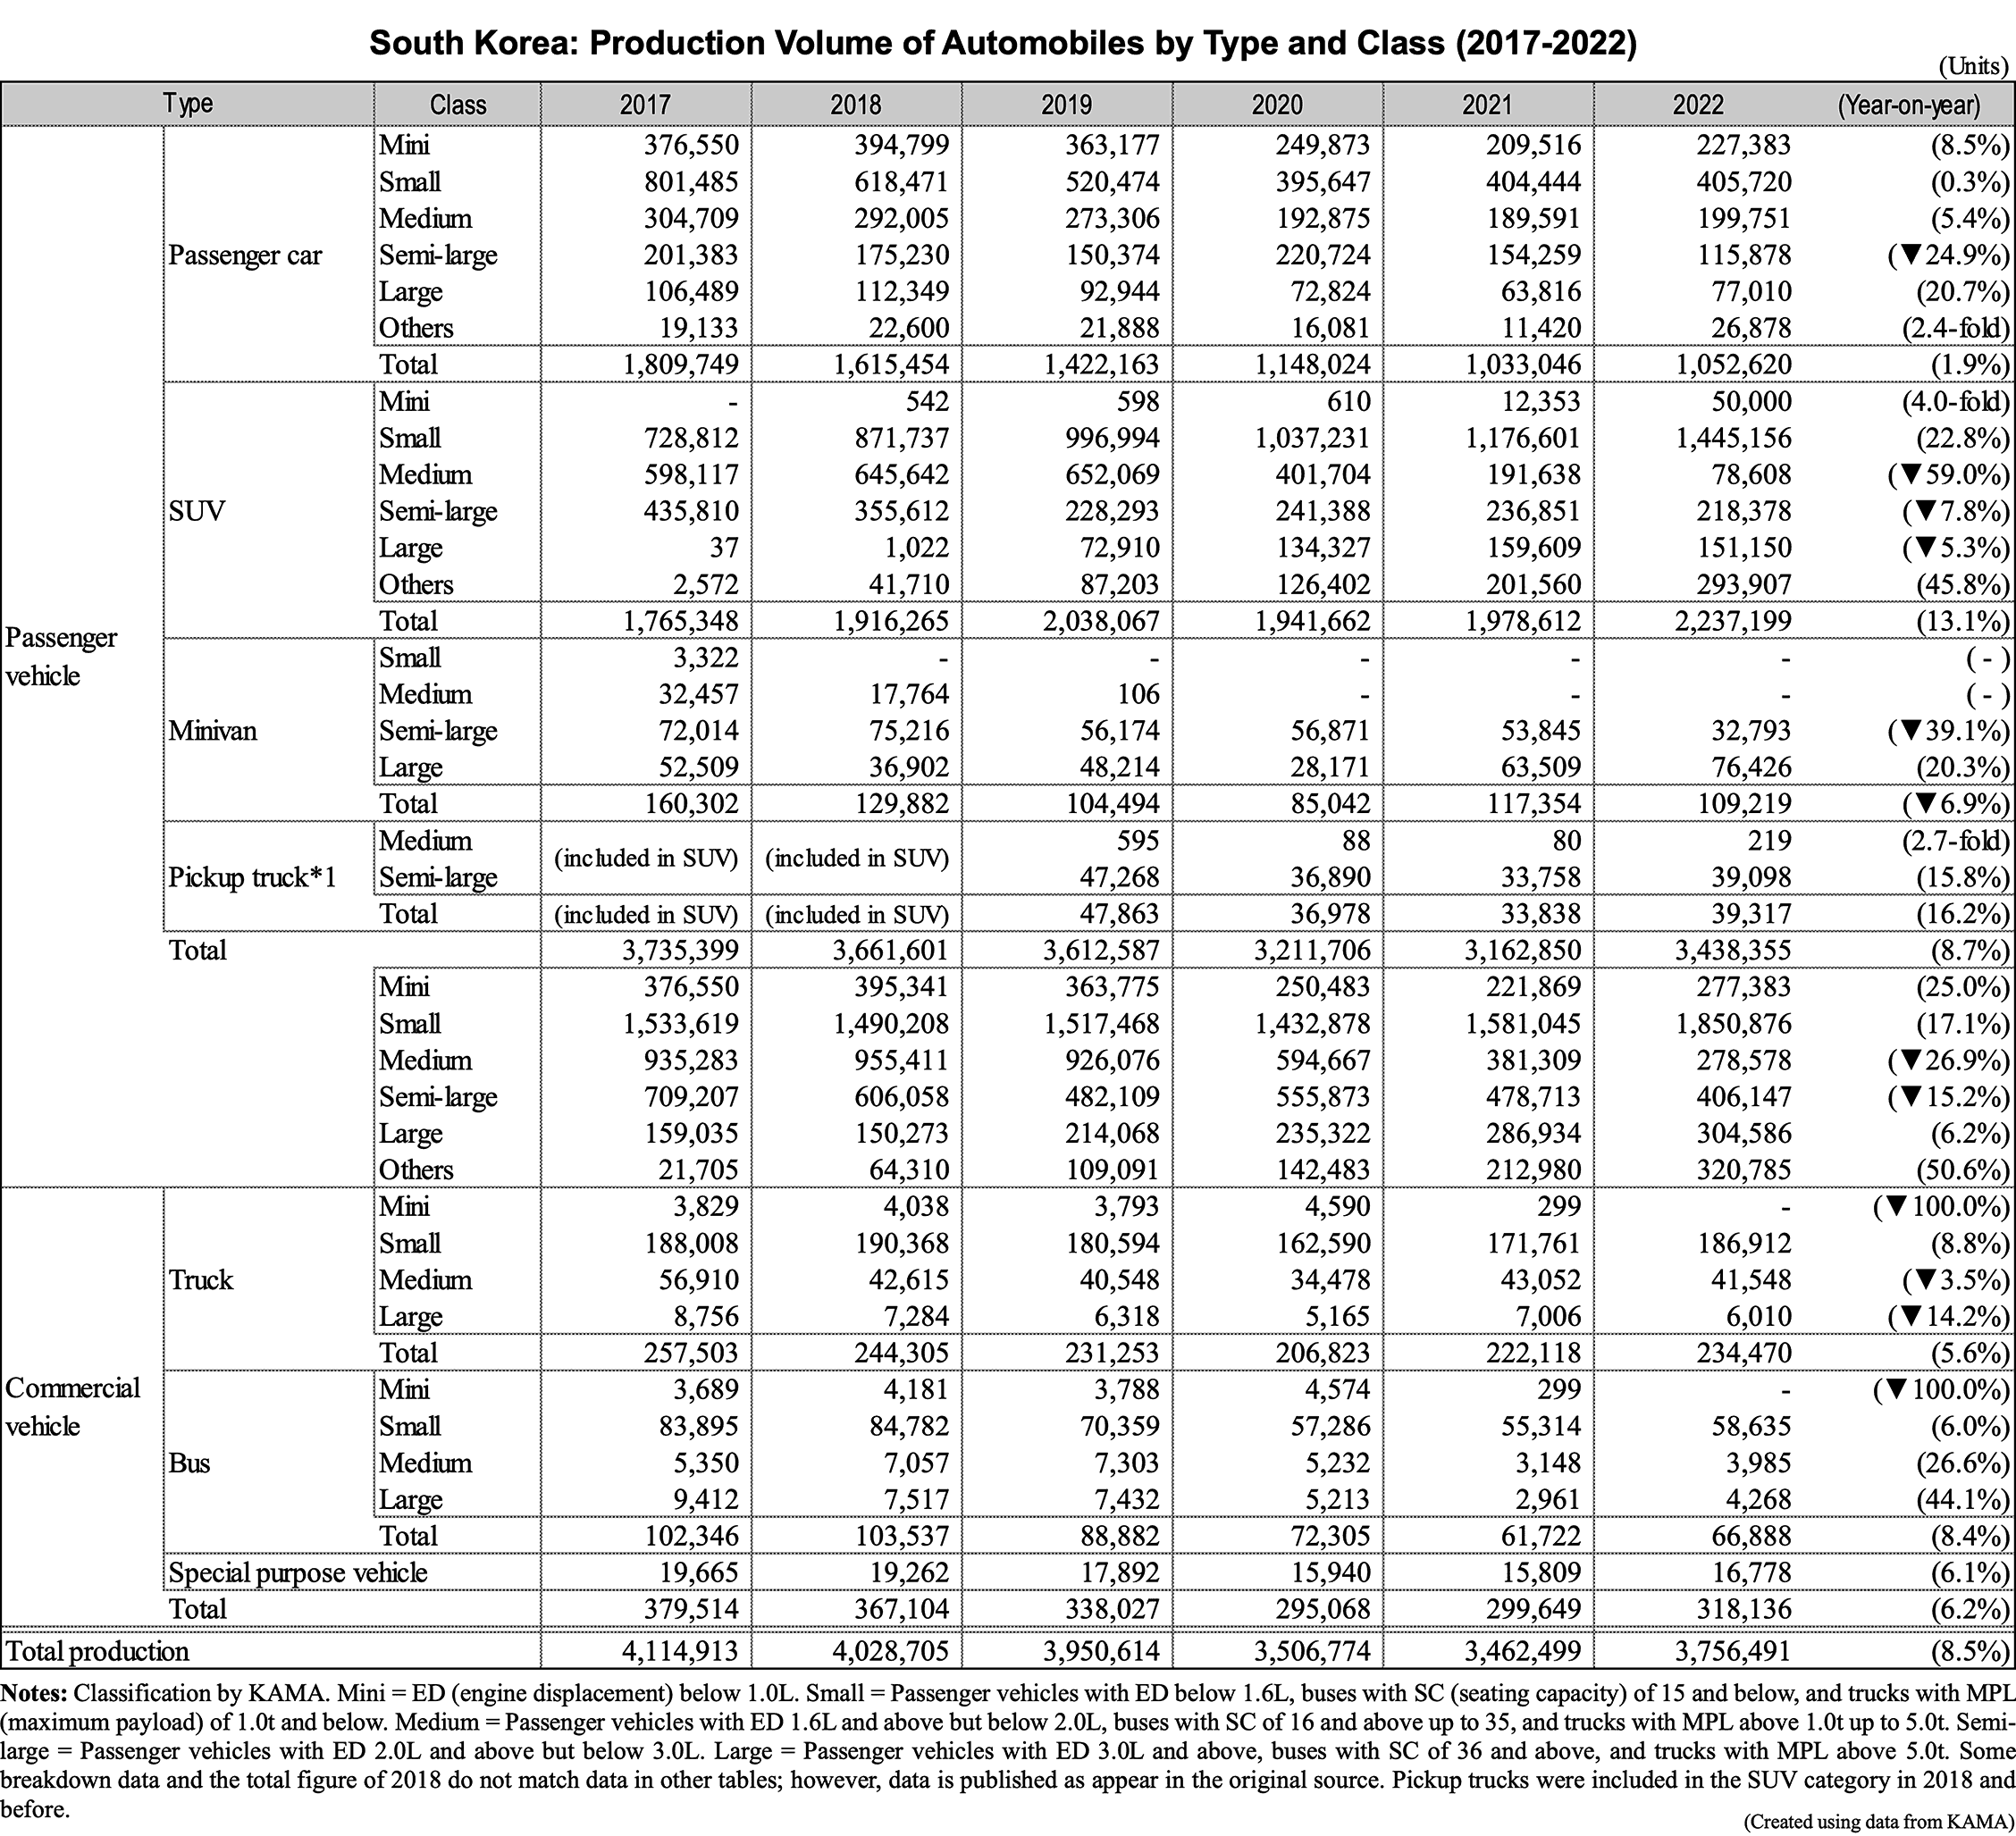 Table data: South Korea: Production Volume of Automobiles by Type and Class (2017-2022)